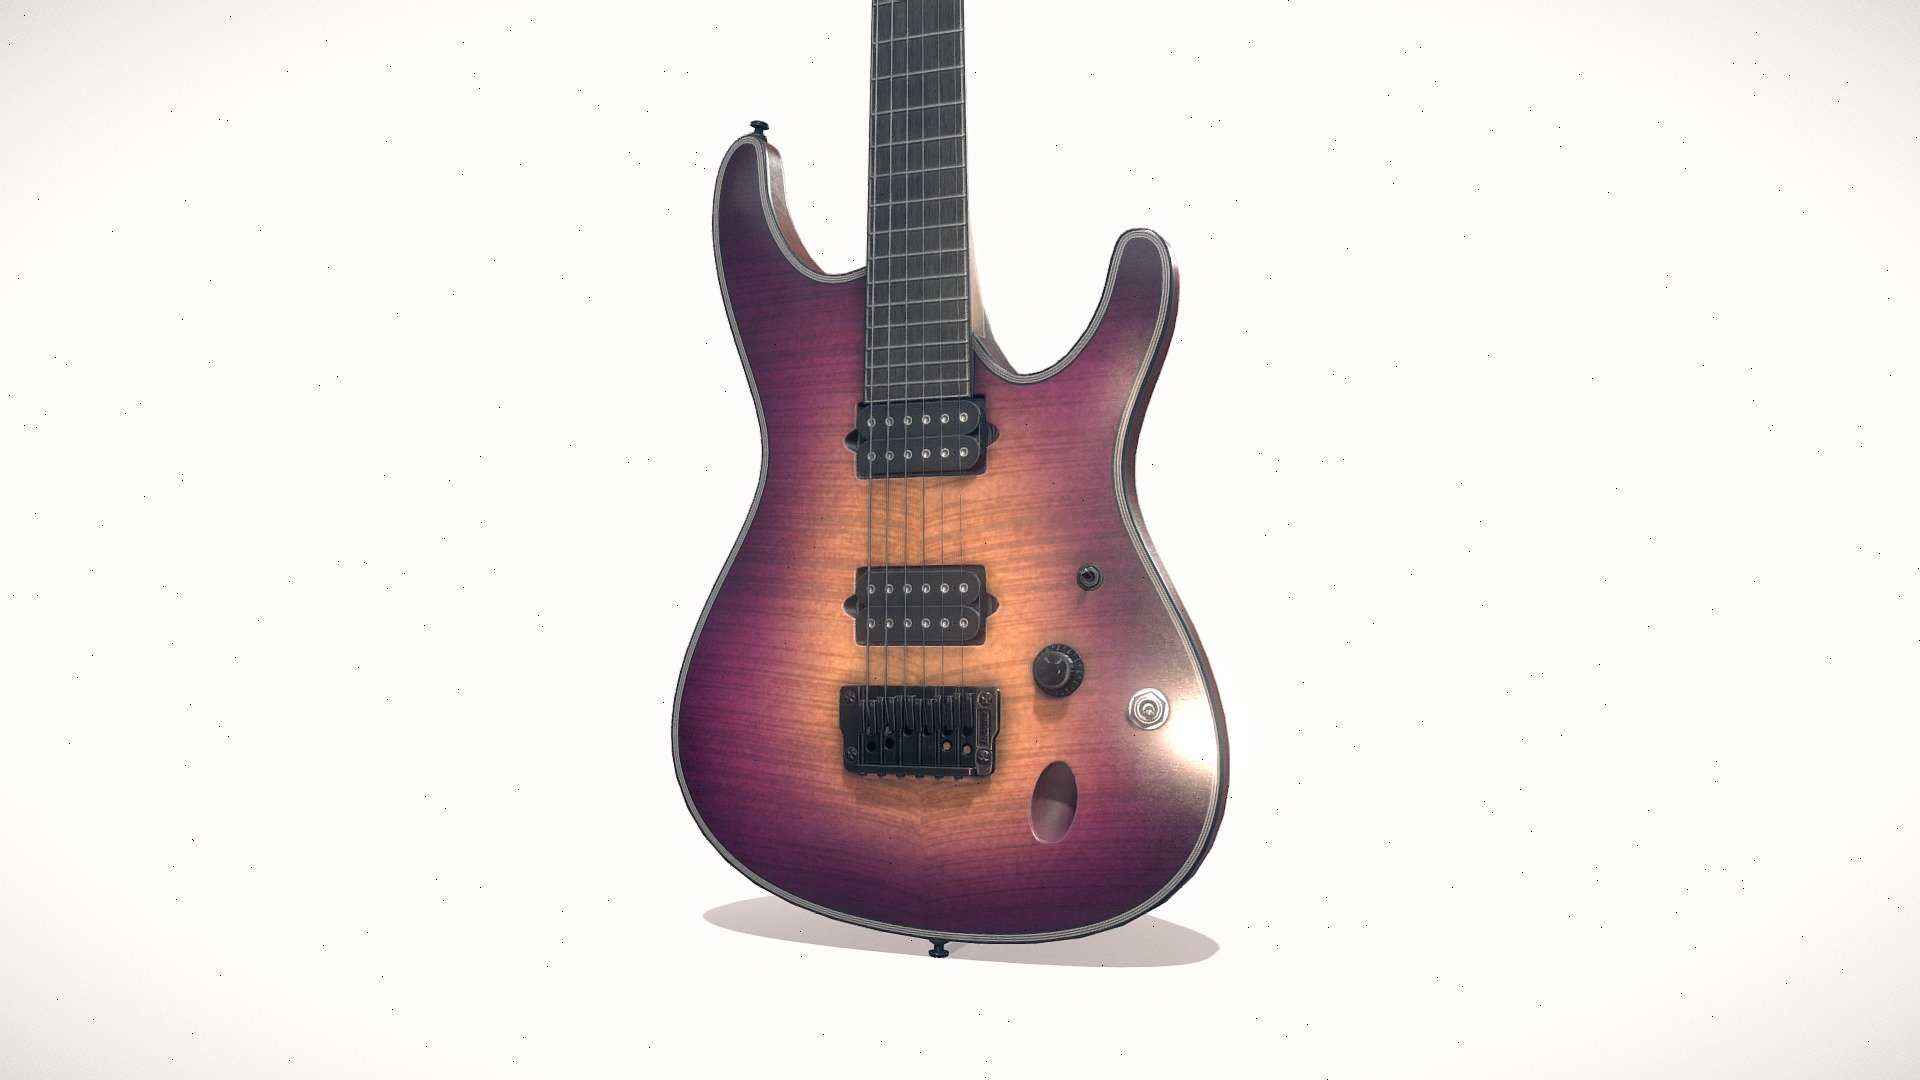 Electric Guitar - Ibanez_SIX6DFM

Includes 4 LODs:
LOD 0 - 8.3k Triangles
LOD 1 - 5.2k Triangles
LOD 2 - 2.8k Triangles
LOD 3 - 1.3k Triangles

Optimised for realtime rendering. Perfect for XR/Mobile.

Includes: 4K Albedo, Normal, Metallic, Roughness and Ambient Occlusion Maps

Includes Substance Painter file for customisation 3d model